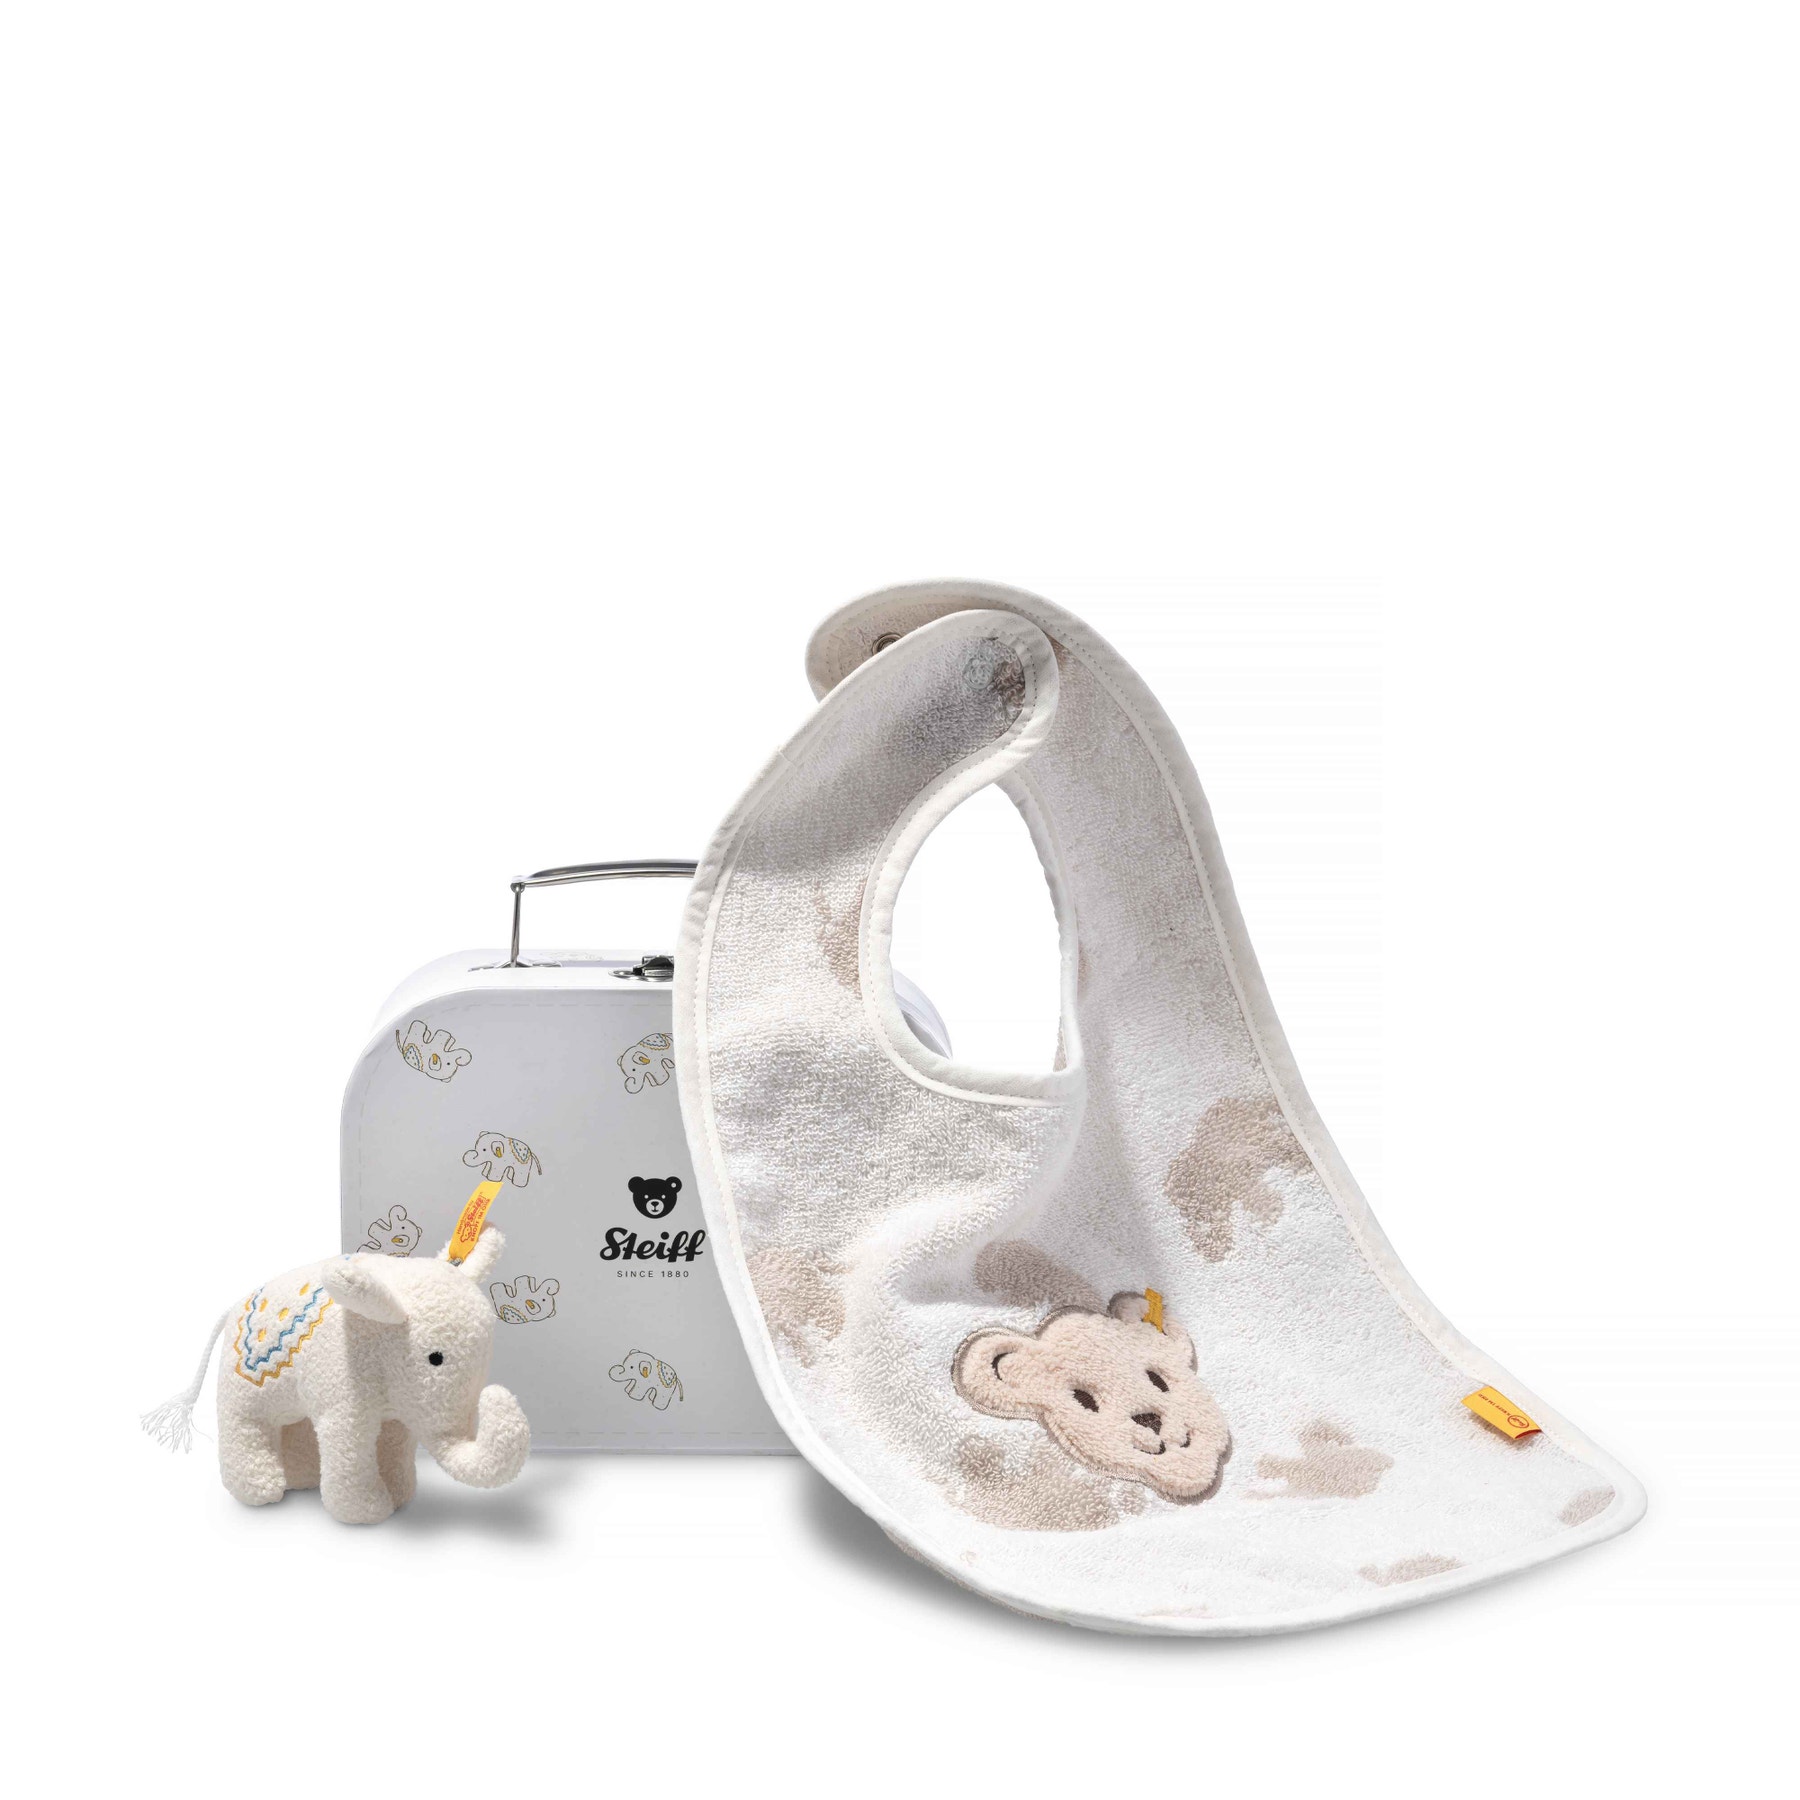 Little Elephant Plush Rattle and Bib in Travel Suitcase, 3 Piece Baby Gift Set